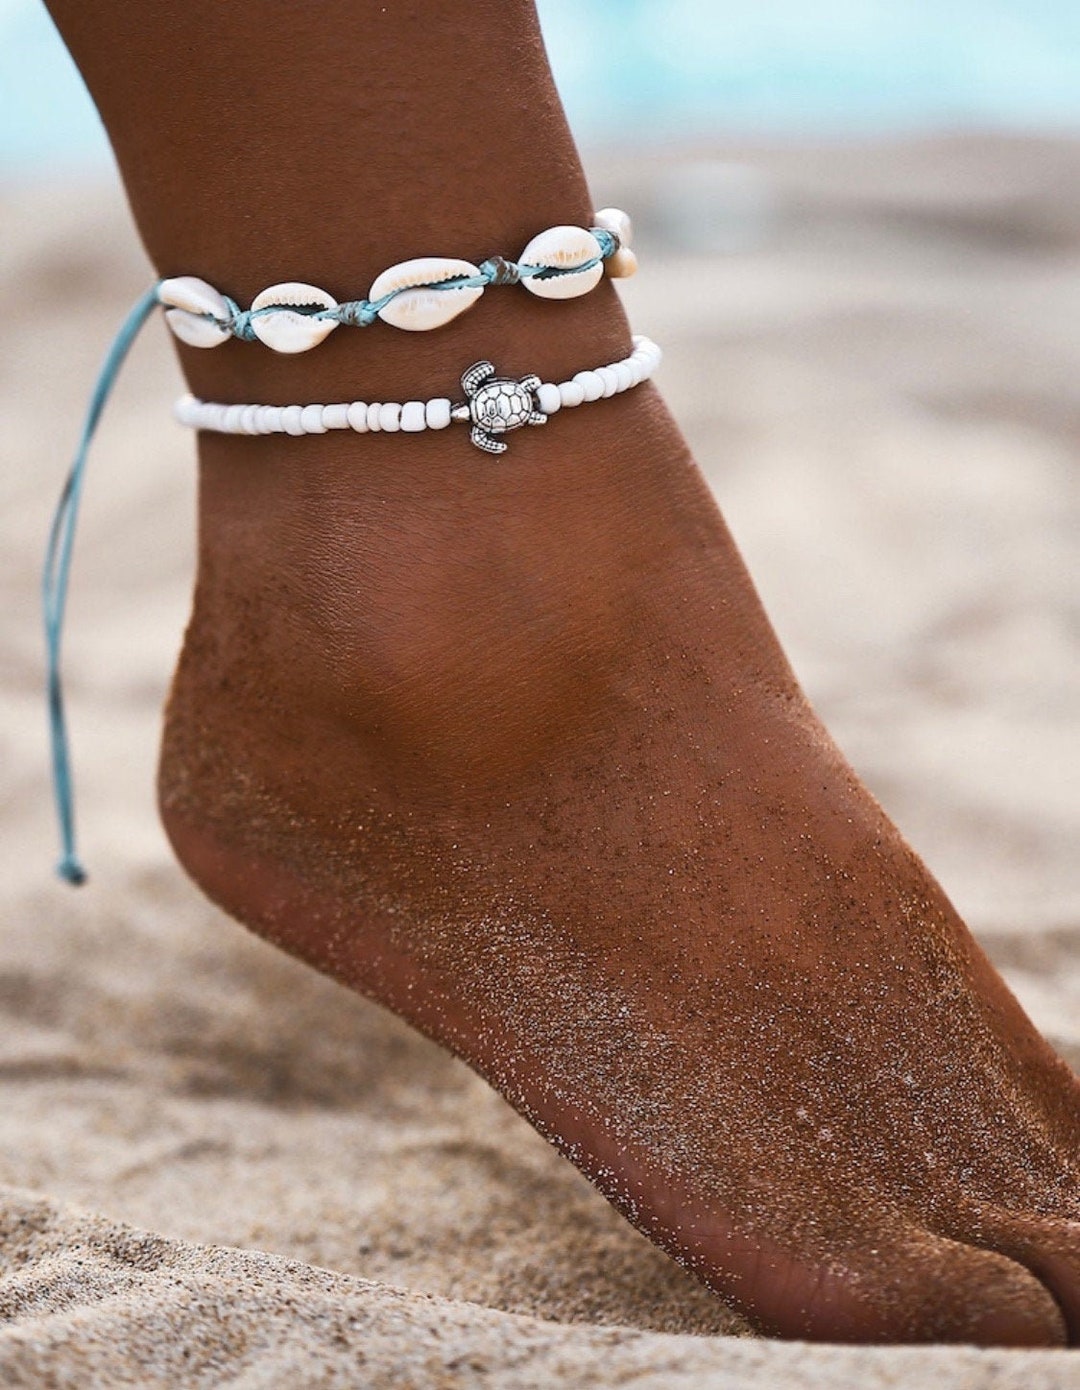 Sea Turtle & Cowrie Shell Anklets 2 Pc, Anklet Set, Sea Turtle